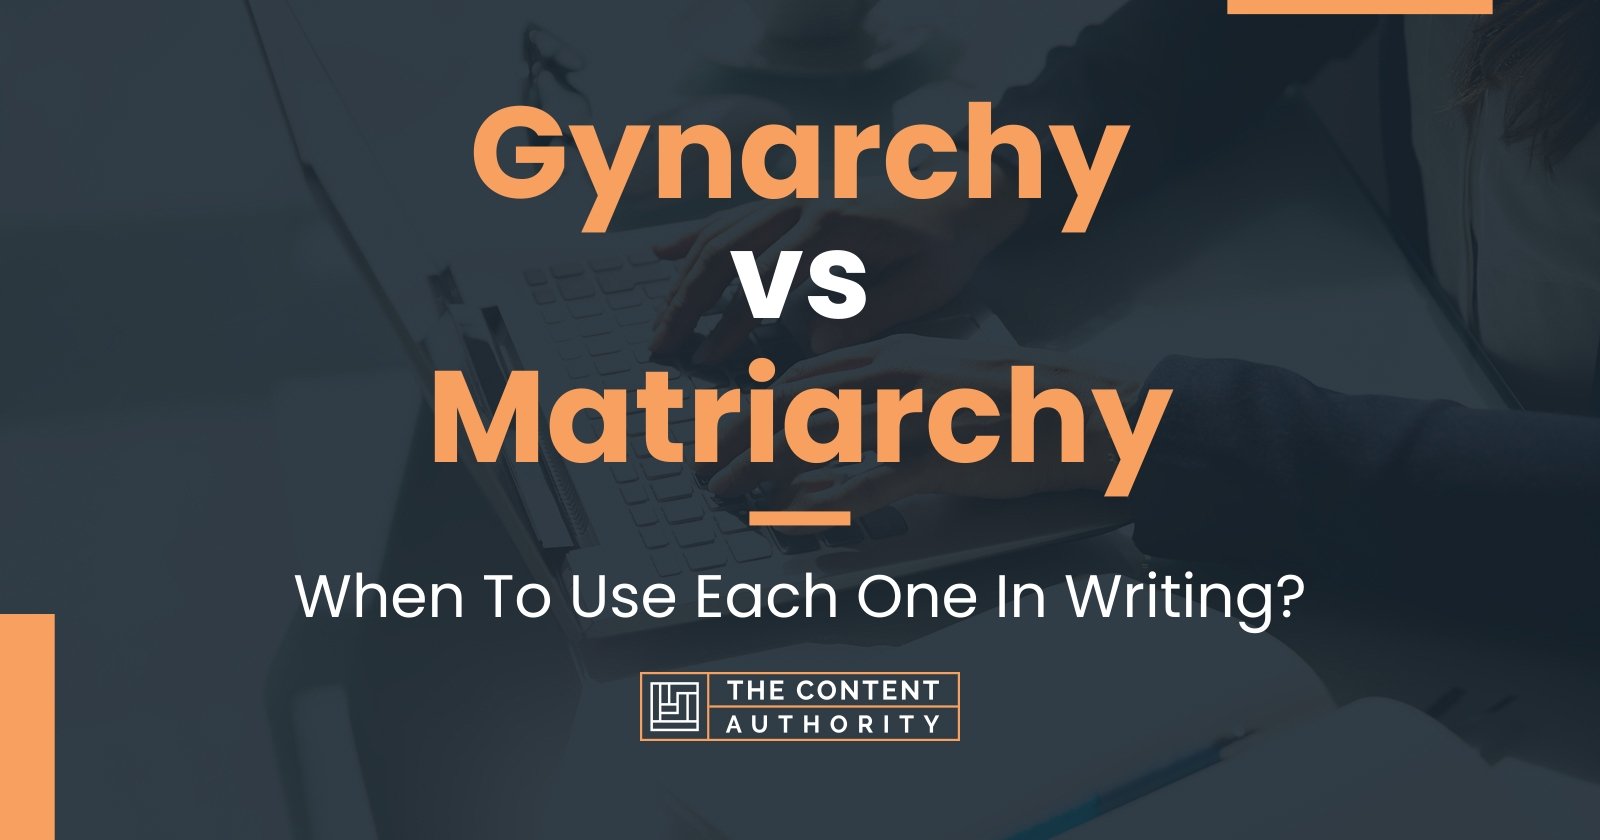 Gynarchy vs Matriarchy: When To Use Each One In Writing?